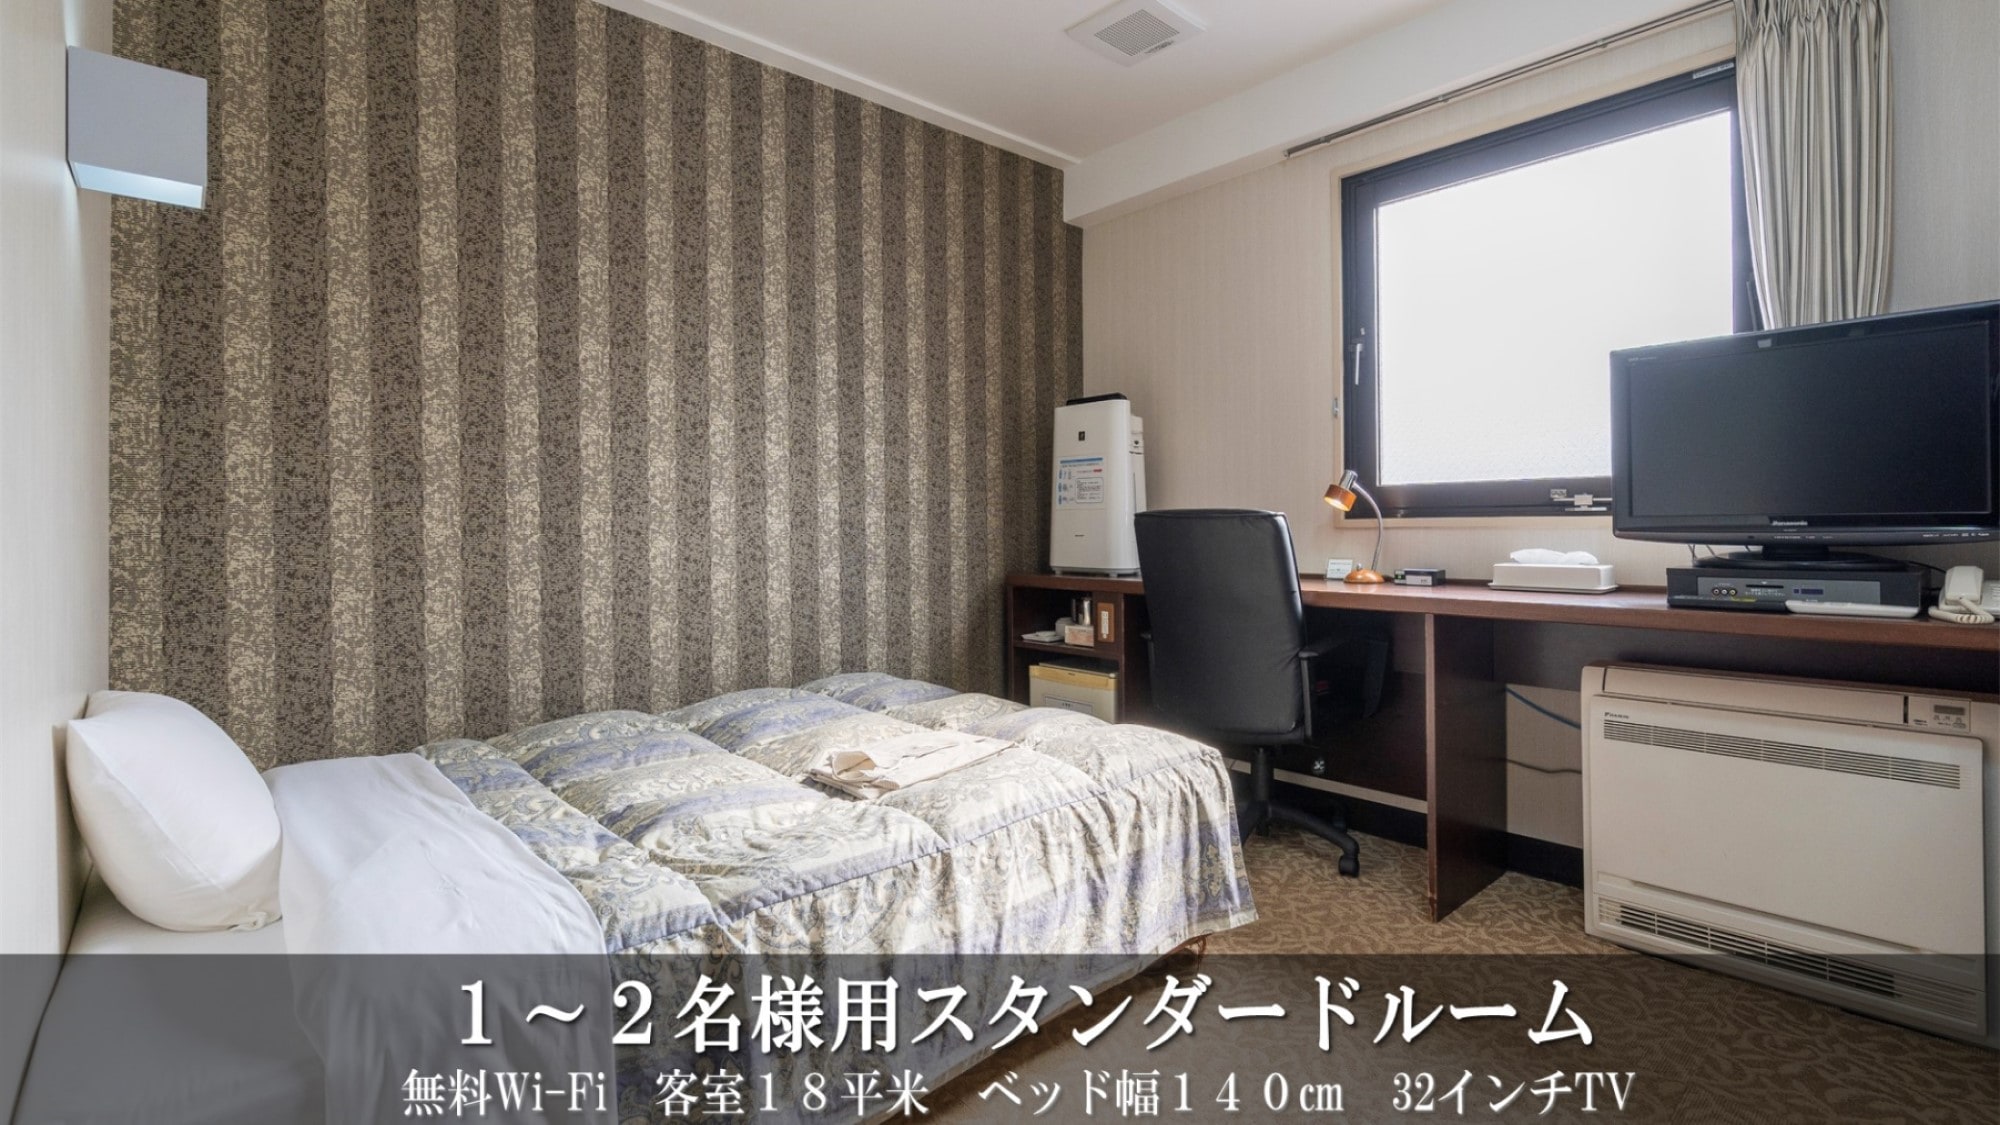 Standard room (18 square meters for 1 to 2 people, bed width 140 cm, 32 inch TV, non-smoking / smoking)